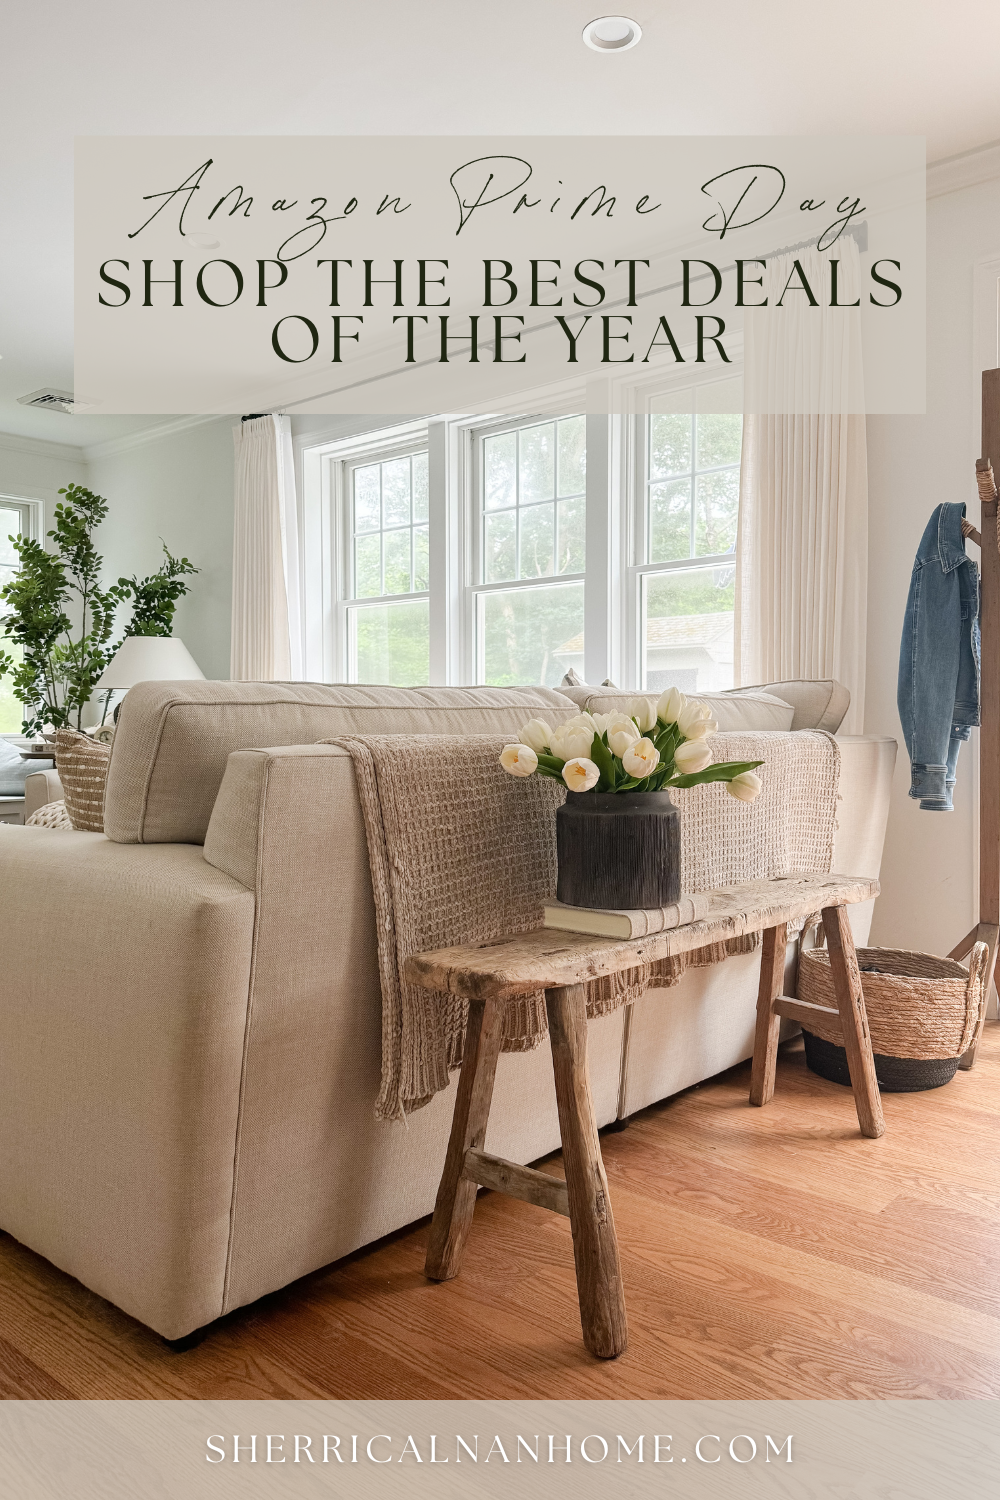 Shop the Best Deals of the Year | Amazon Prime Day | home decor, home sales, home accessories, home essentials, kitchen essentials, kitchen tools, cleaning tools, cleaning essentials, dyson vacuum, bissel cleaner, home hacks, home tips, accent pieces, home decorating